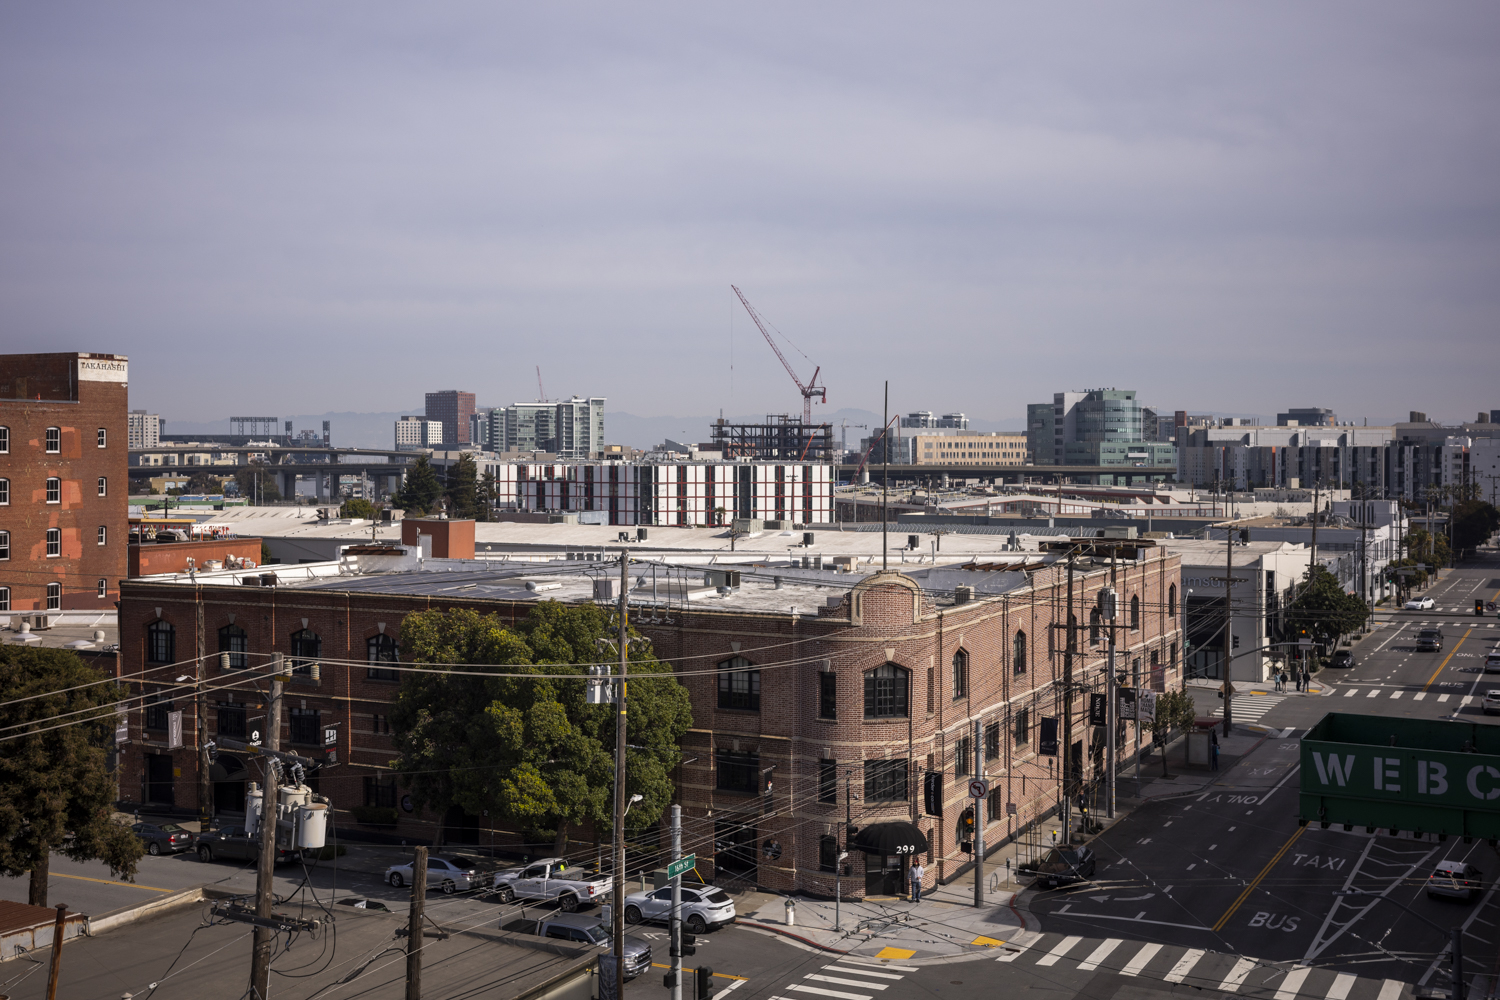 300 Kansas Street view looking towards 1450 Owens Street and Mission Rock along the city skyline, image by author